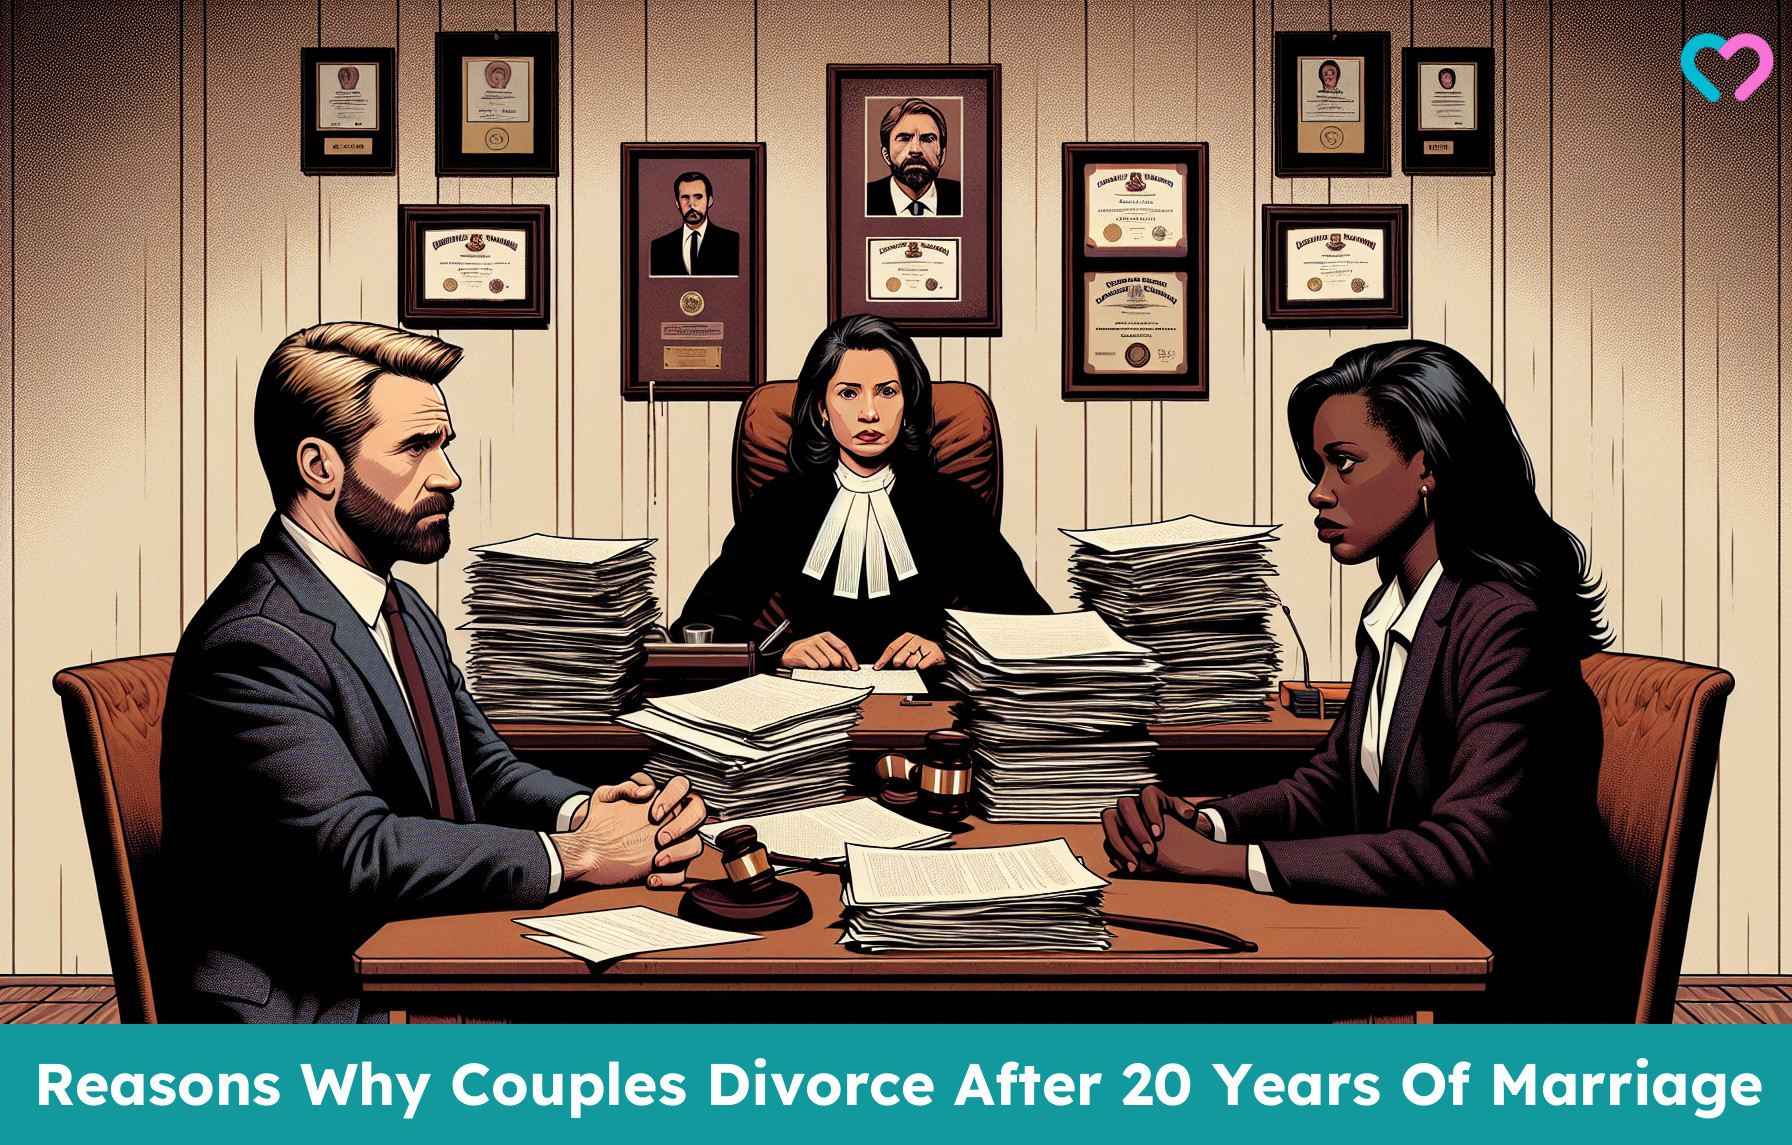 Divorce After 20 Years Of Marriage_illustration